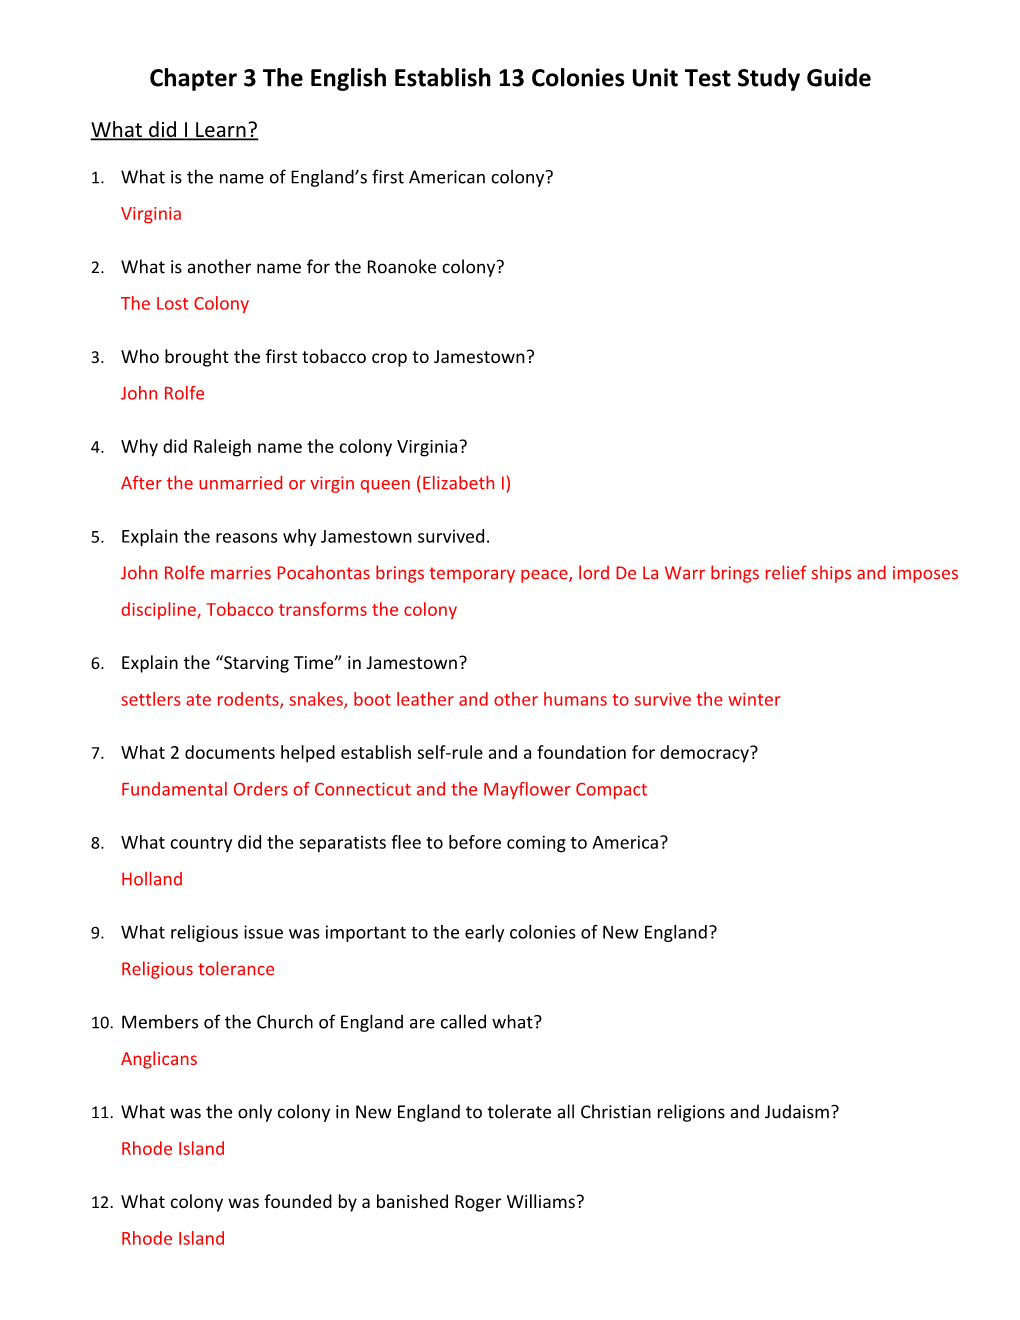 Chapter 3 the English Establish 13 Colonies Unit Test Study Guide